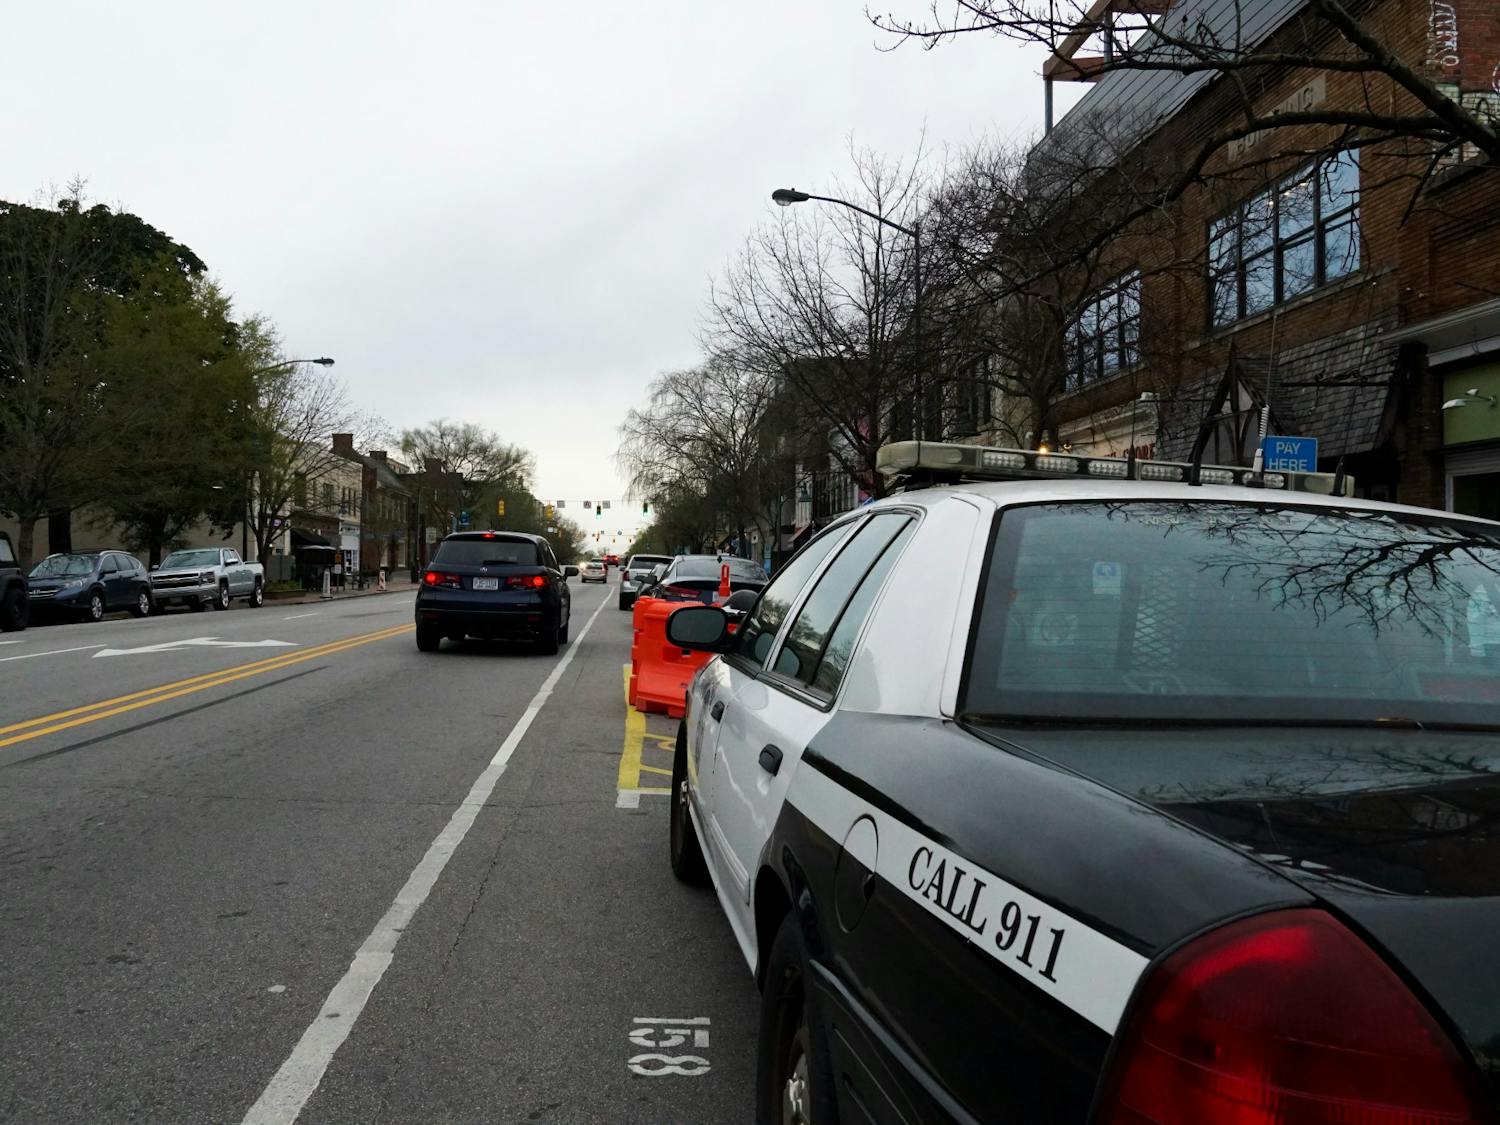 A City of Chapel Hill police car is parked on Franklin Street on Sunday, March 28, 2021. The town said that there would be more monitoring of pedestrian areas on main streets.